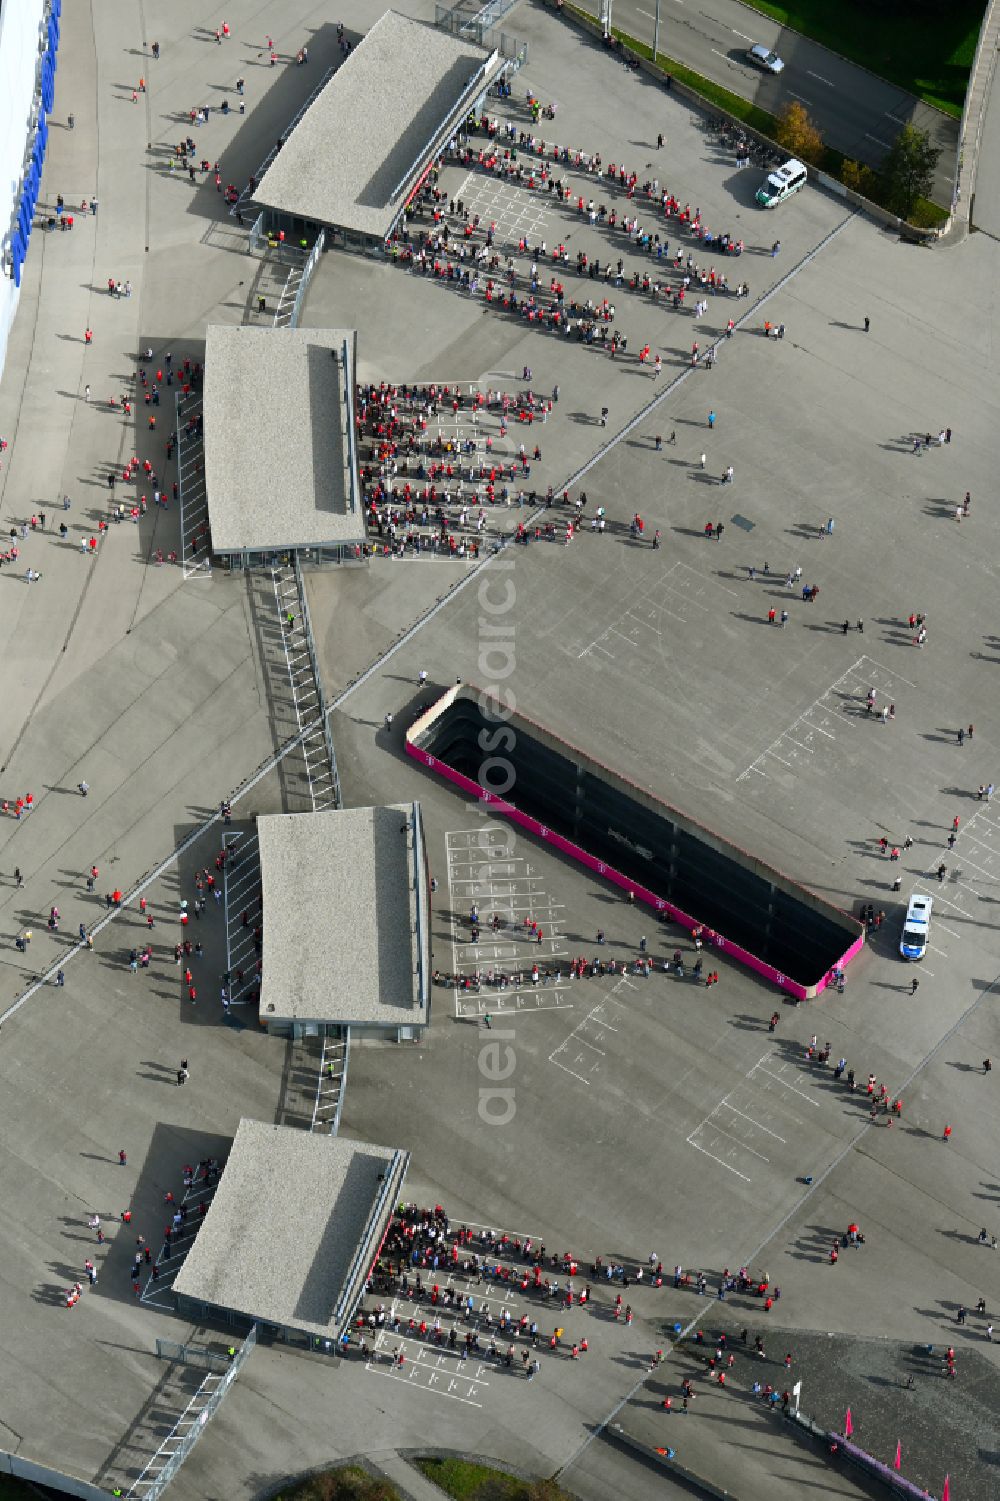 München from the bird's eye view: Crowds of people in front of the entrance control of football fans at the entrances to the security check on the sports facility grounds of the arena of the stadium Allianz Arena on Werner-Heisenberg-Allee in the district Freimann in Munich in the state Bavaria, Germany